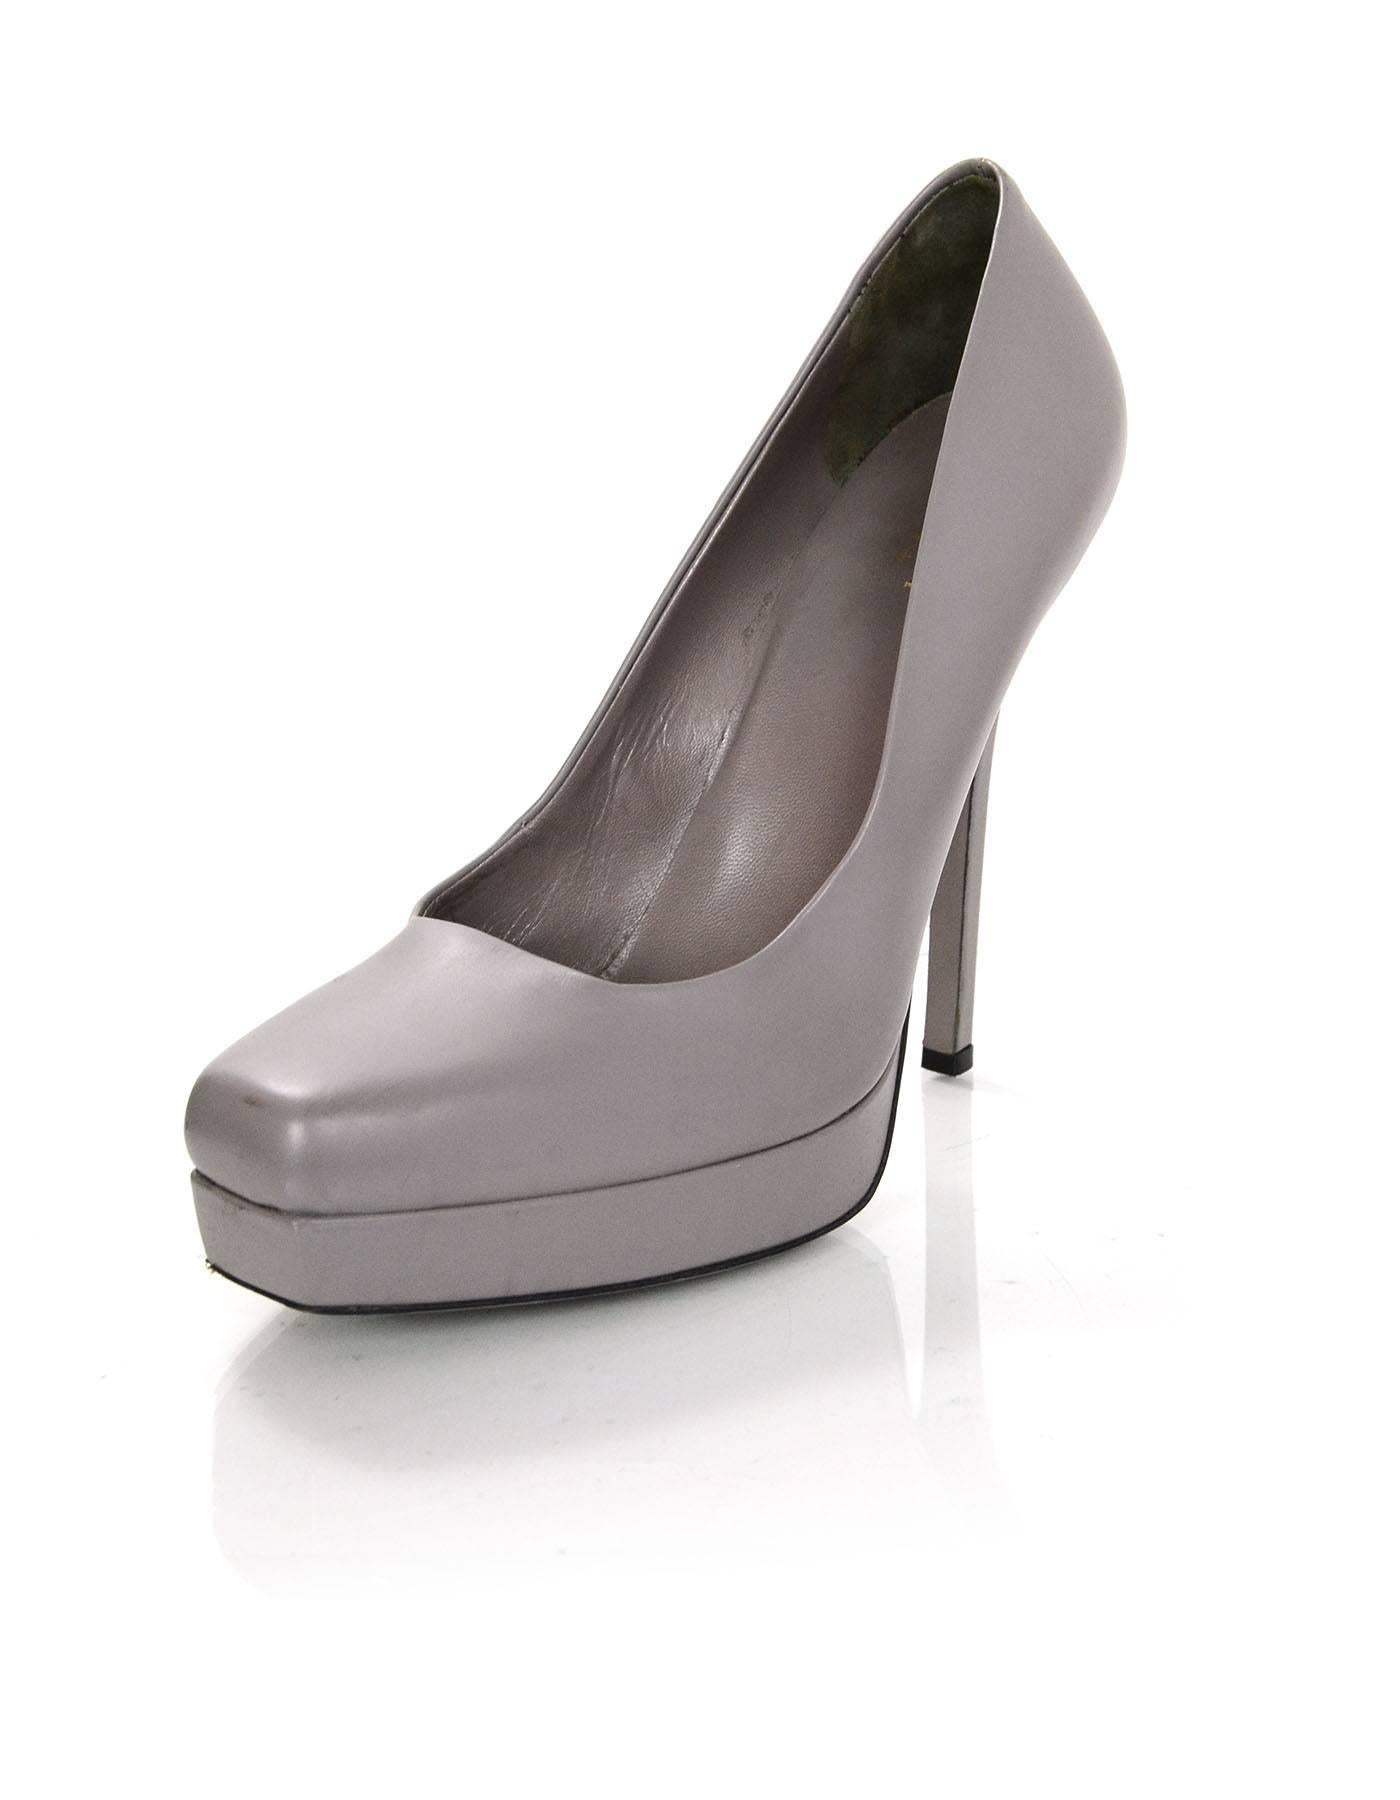 Gucci Grey Platform Pumps Sz 40
Features square toes

Made In: Italy
Color: Grey
Materials: Leather
Closure/Opening: Slide on
Sole Stamp: Gucci Made in Italy 40
Overall Condition: Excellent pre-owned condition with the exception of light wear at